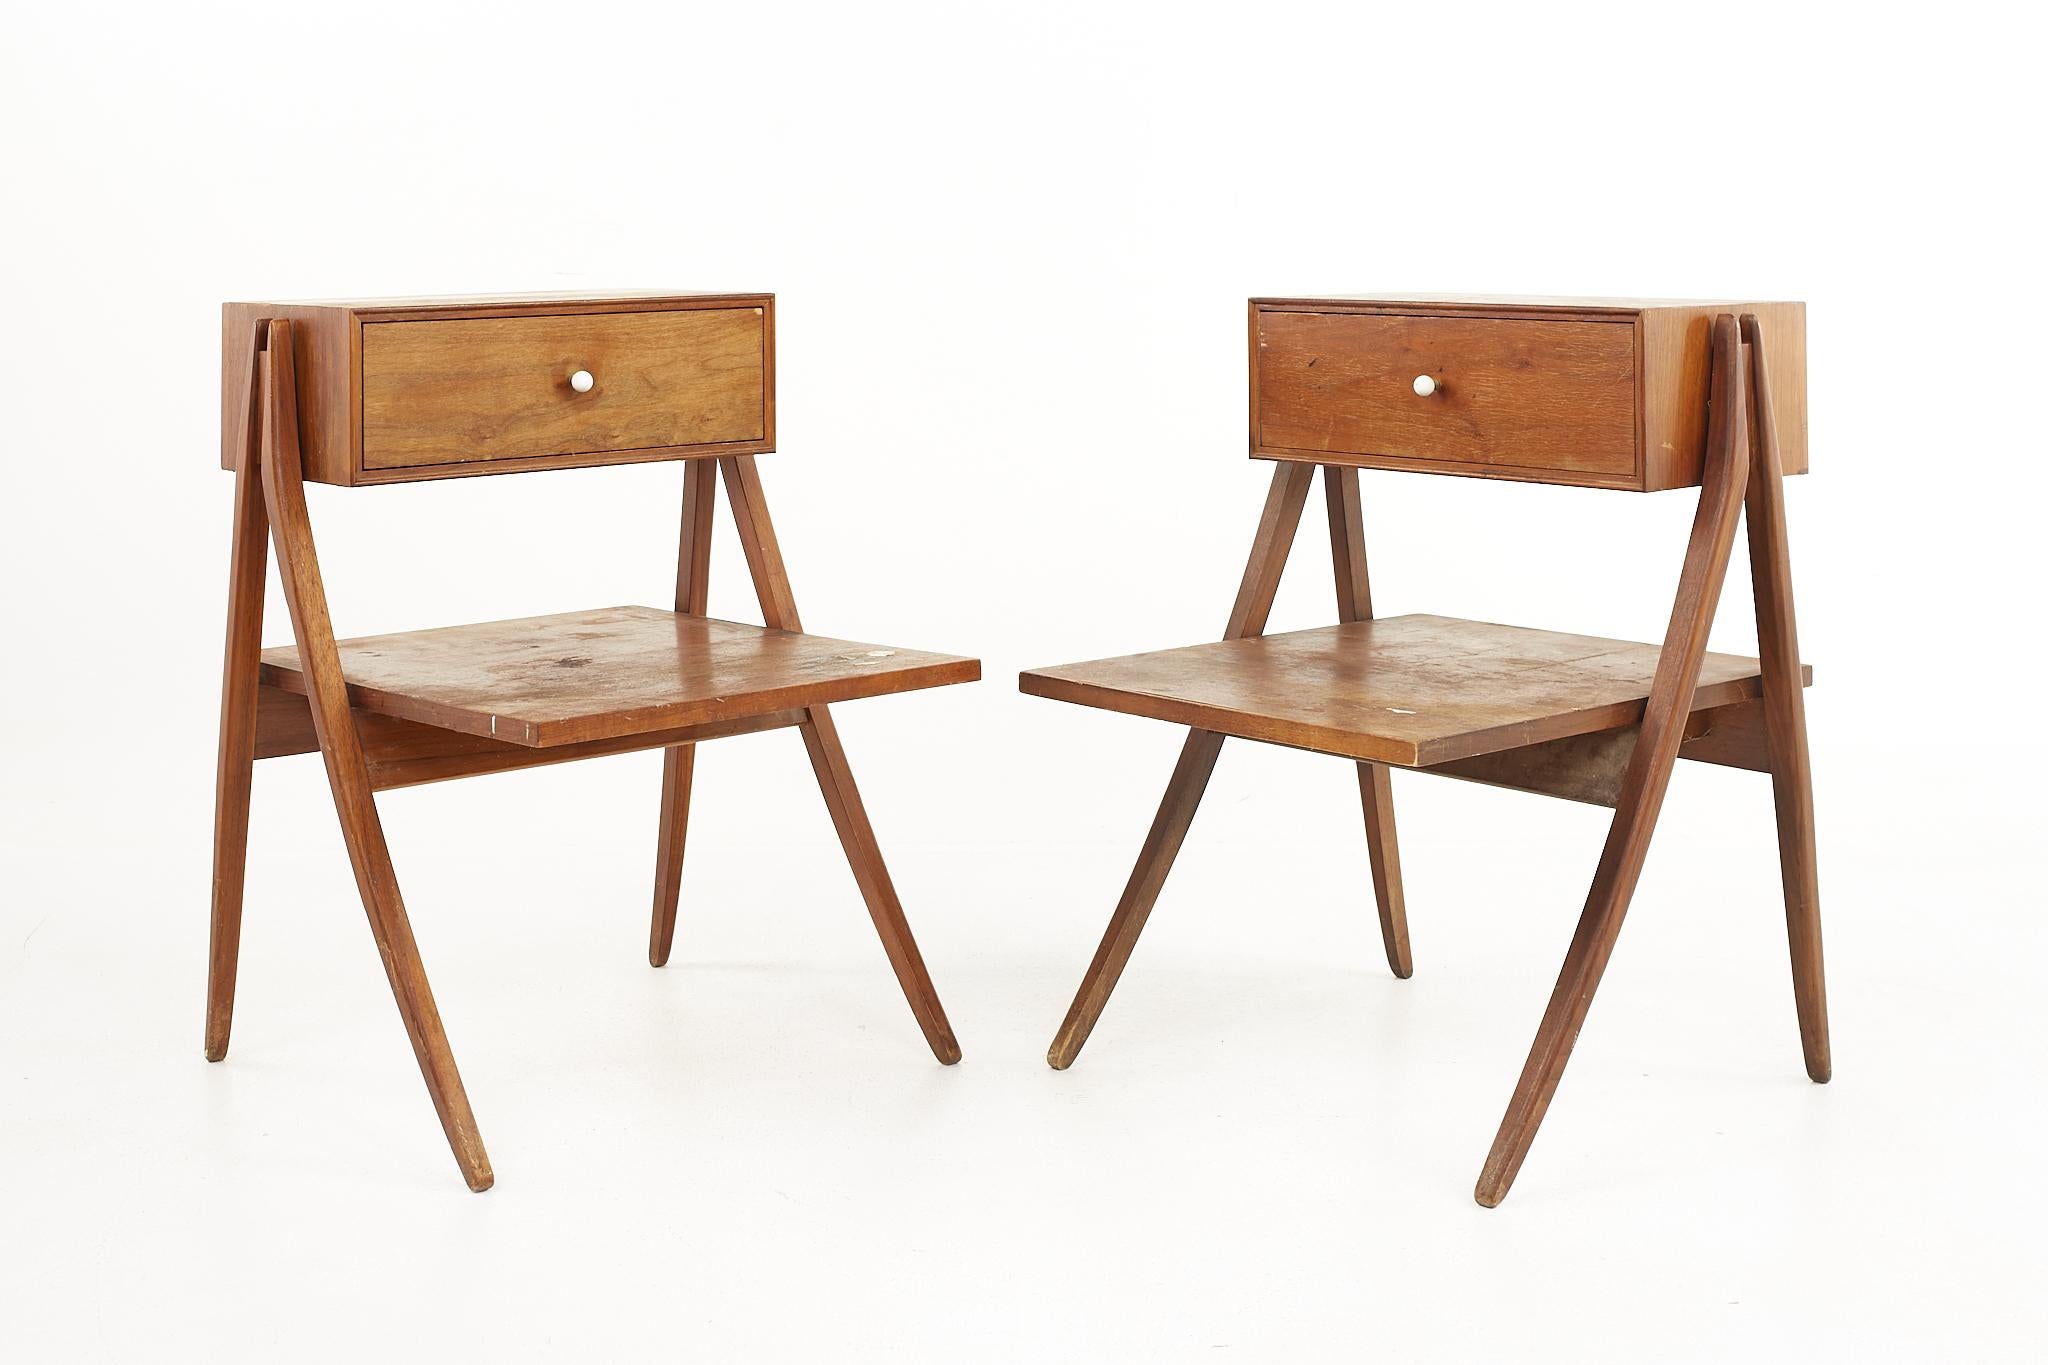 Kipp Stewart for Drexel mid-century sculpted walnut nightstand end tables - a pair

Each nightstand measures: 21.25 wide x 22 deep x 28 inches high

All pieces of furniture can be had in what we call restored vintage condition. That means the